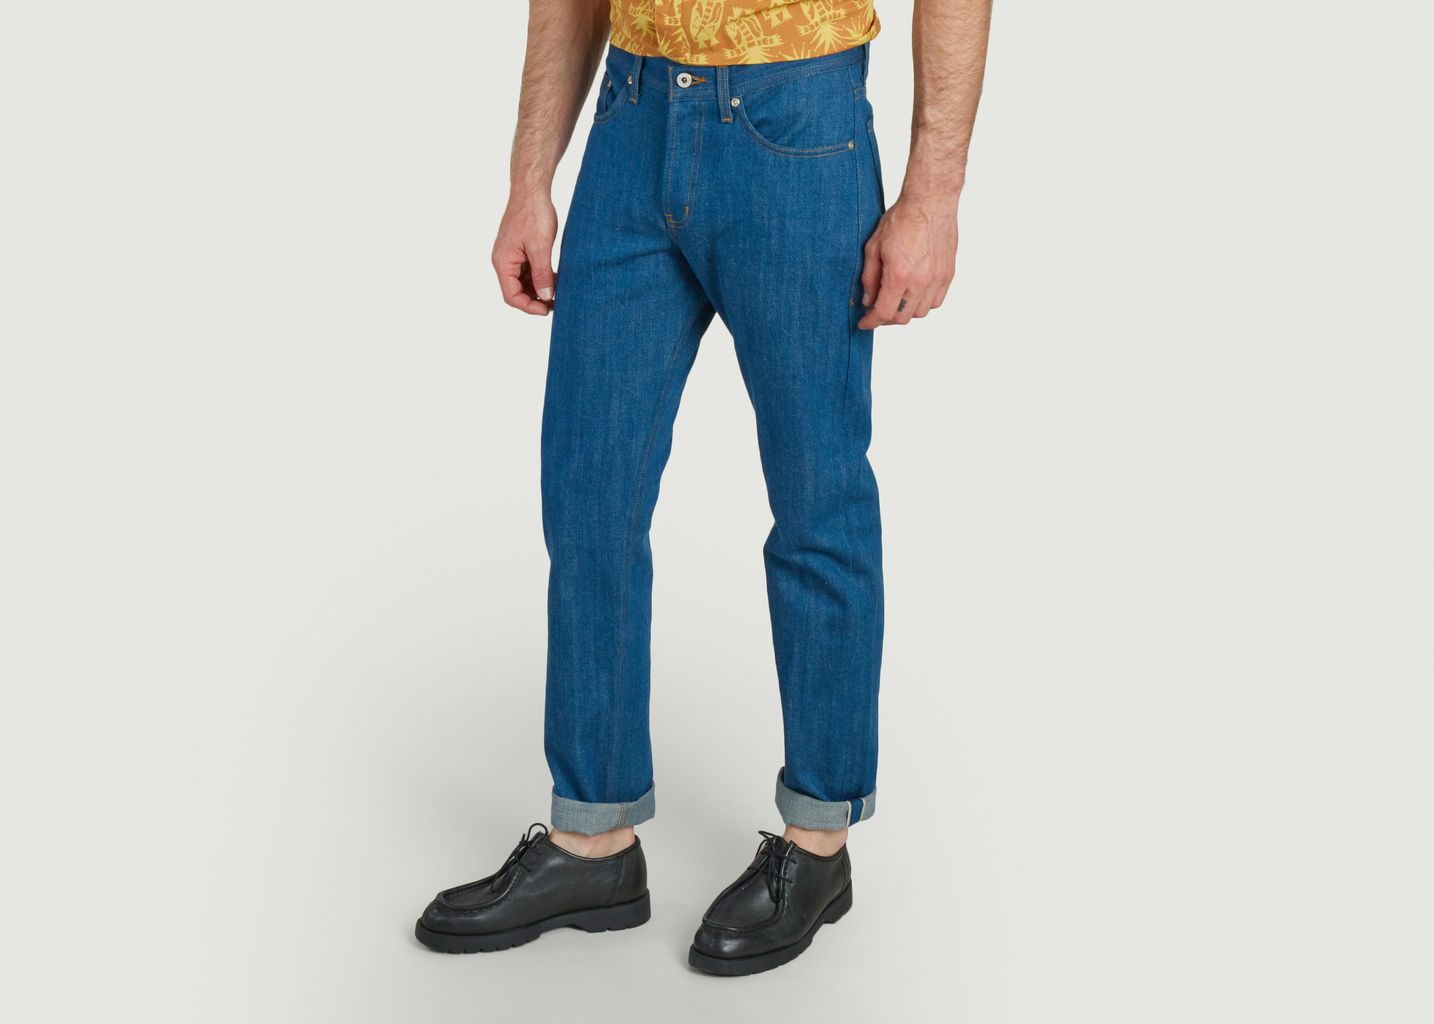 Jean Weird Guy Oceans Edge Selvedge - Naked and Famous